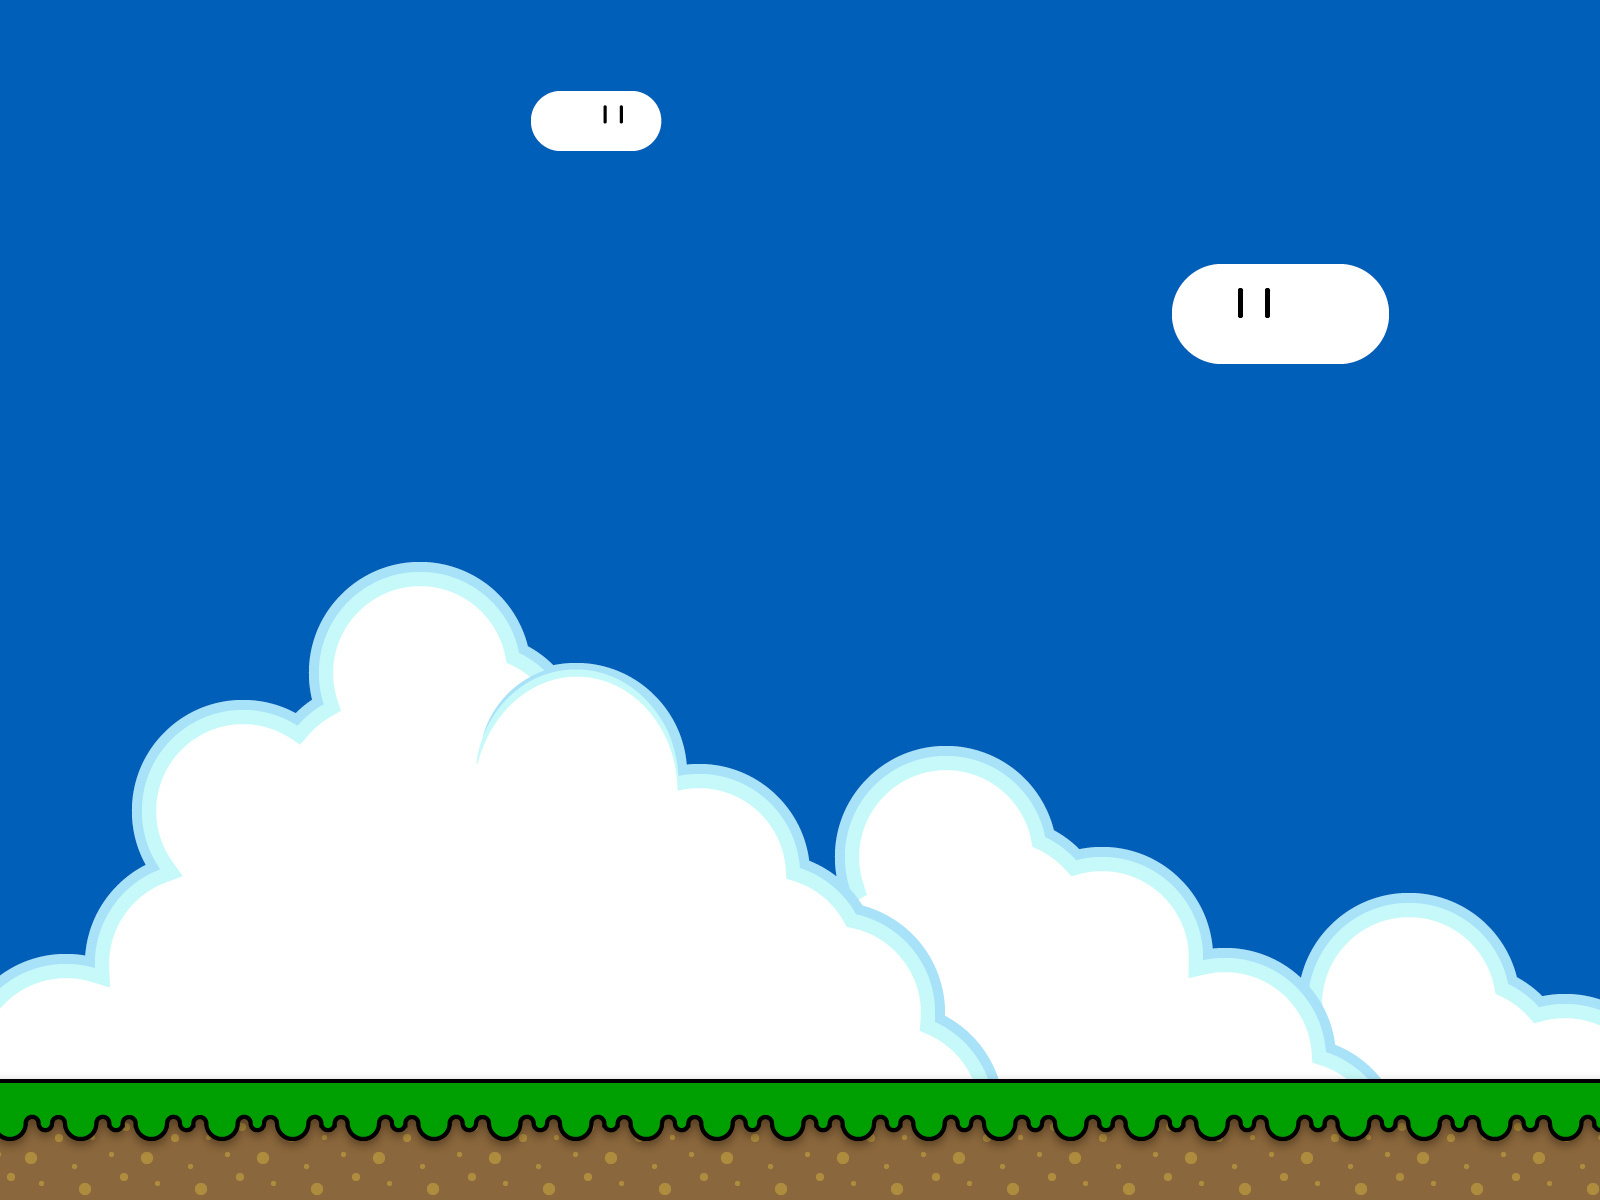 Super Mario Background by Tim Hykes on Dribbble